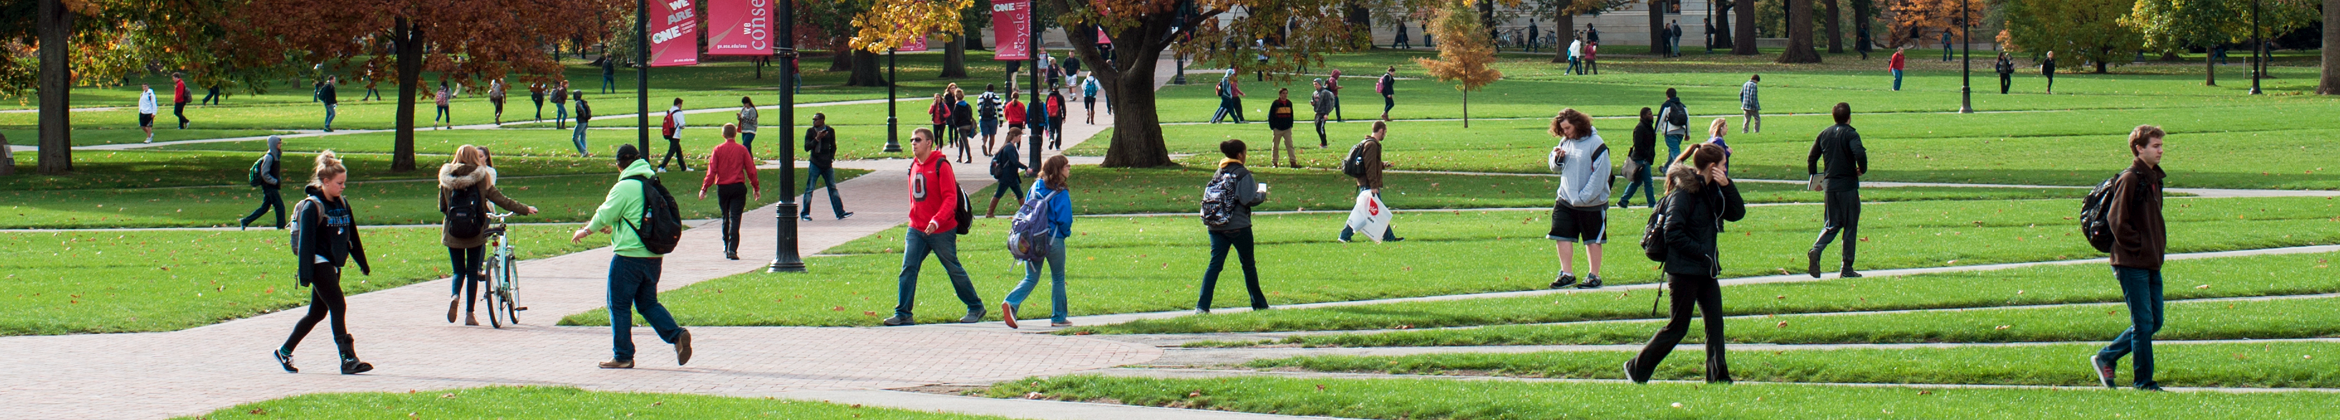 Students on the oval